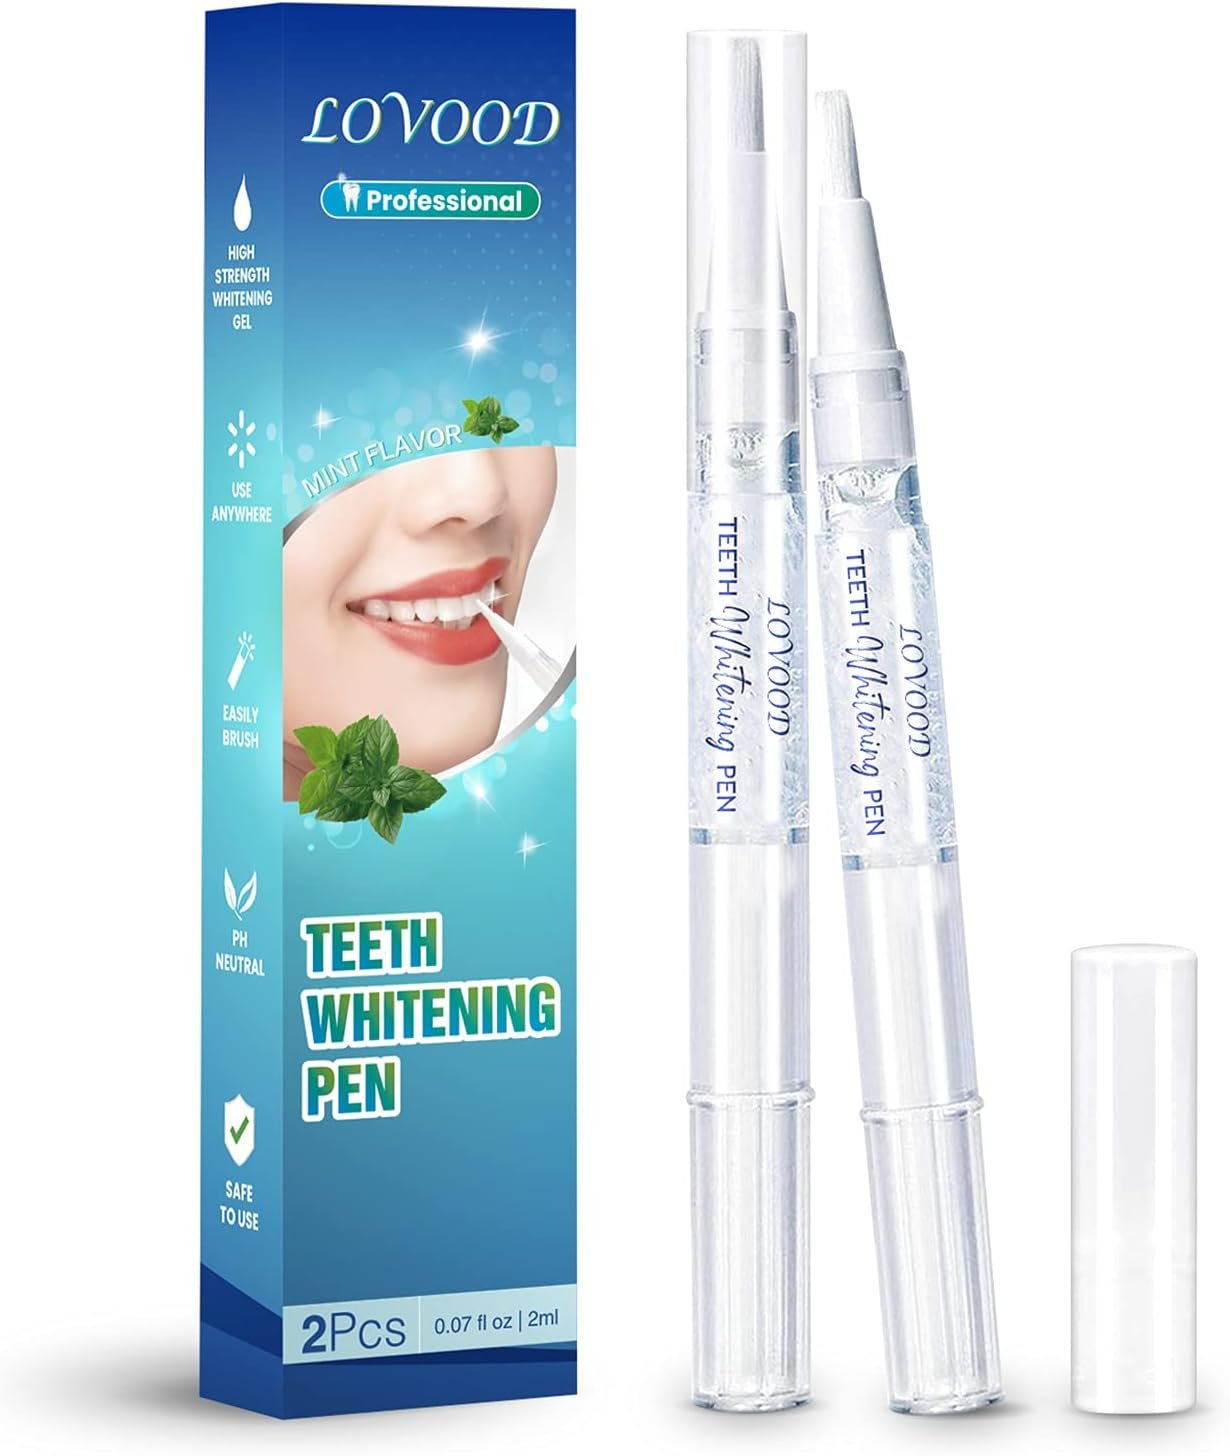 LOVOOD Teeth Whitening Pen(2 Pcs), 20+ Uses, Effective, Painless, No Sensitivity, Travel Friendly, Easy to Use, Beautiful White Smile, Effective Tooth Whitener, Natural Mint Flavor